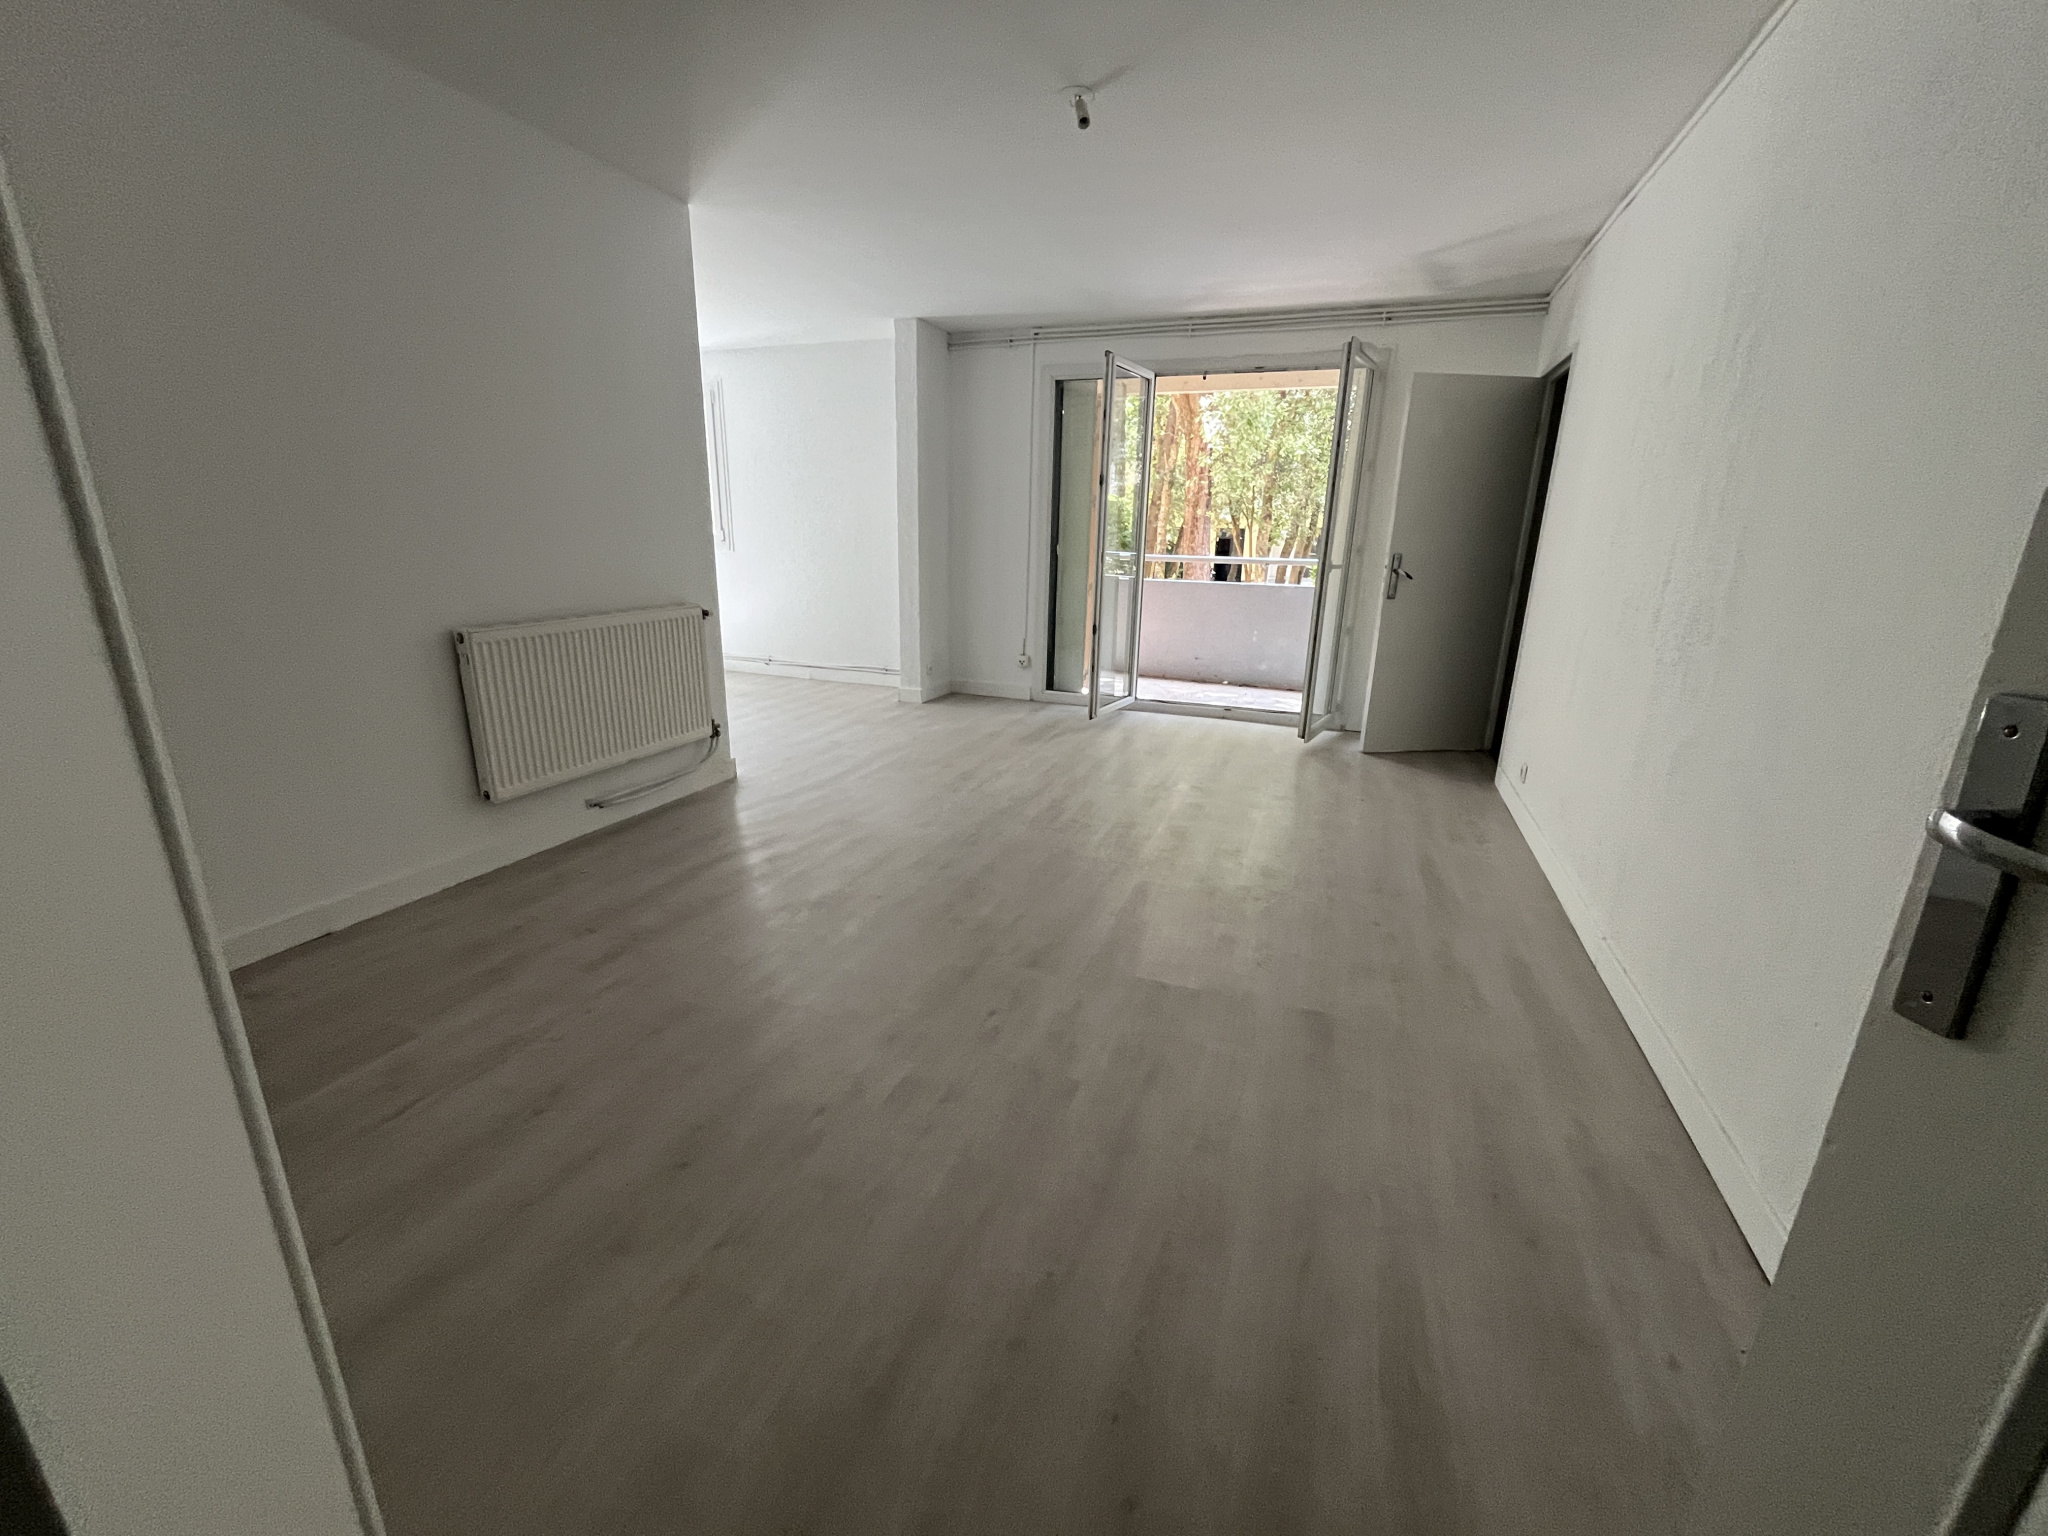 Vente Appartement 82m² 4 Pièces à Antibes (06600) - Infinity Group Immobilier